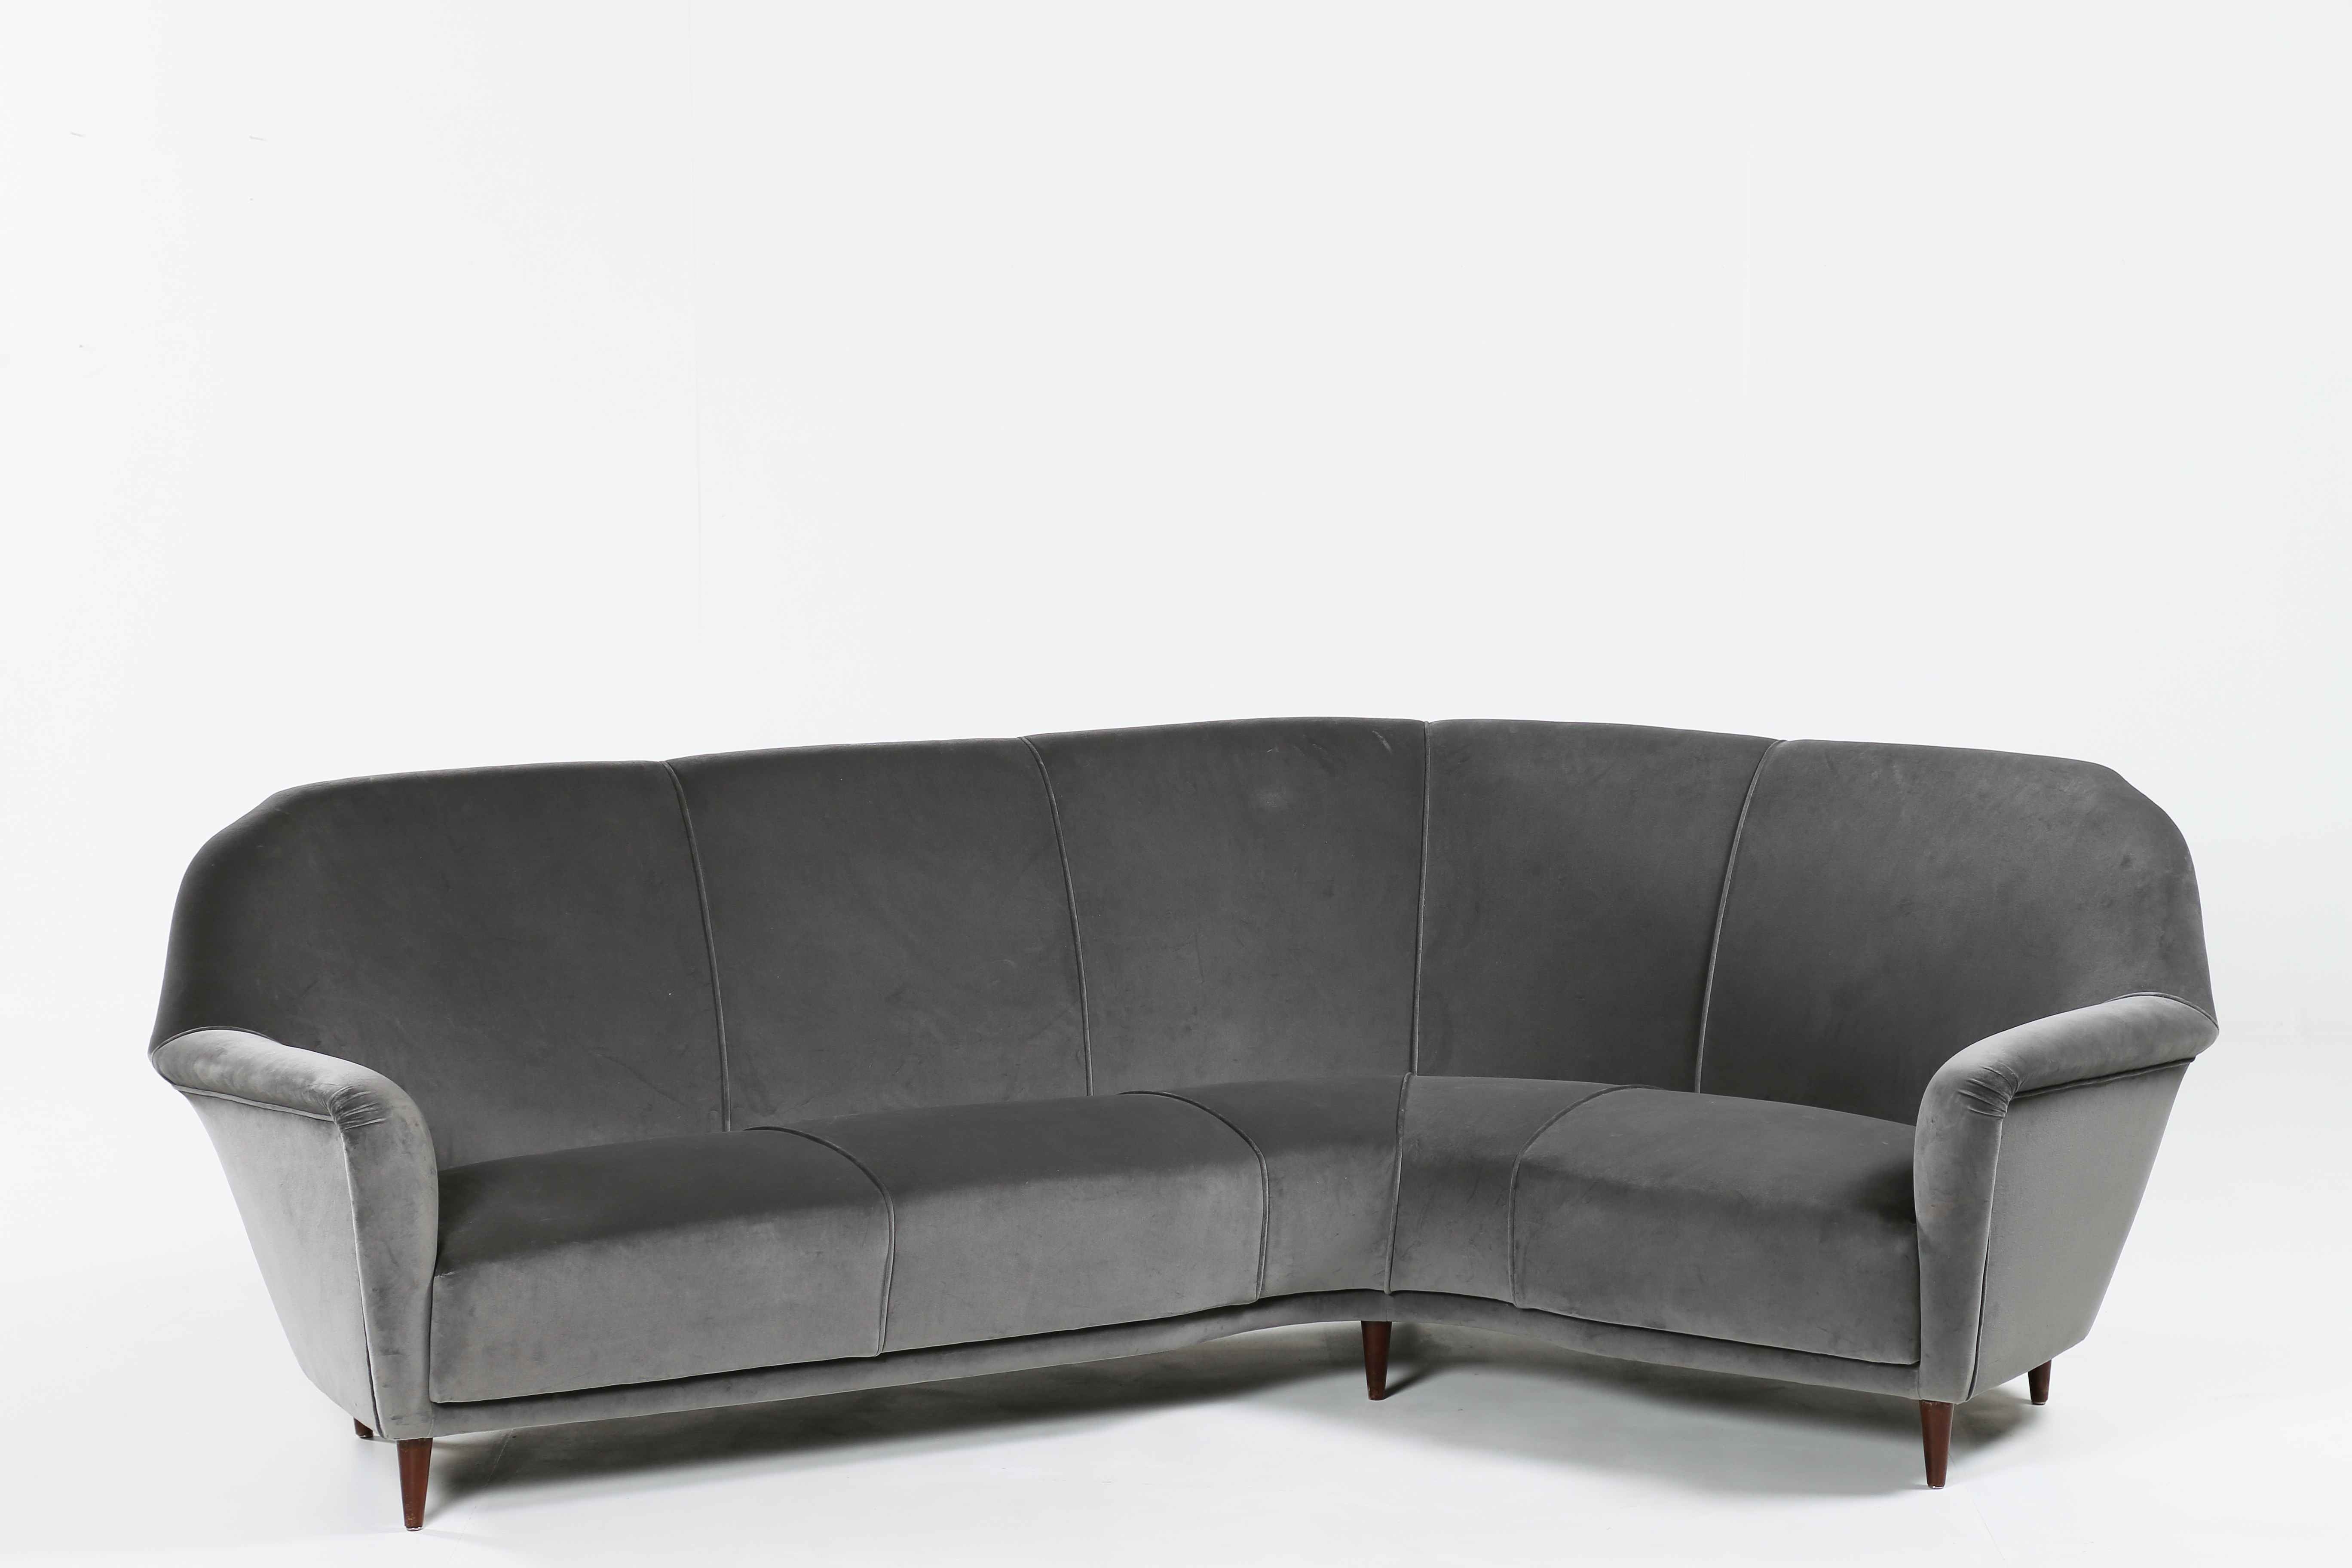 PARISI ICO (1916 - 1996)
Curved sofa.
Produced by Alberto Colombo, Cantù Expertise from the Ico - Image 2 of 2